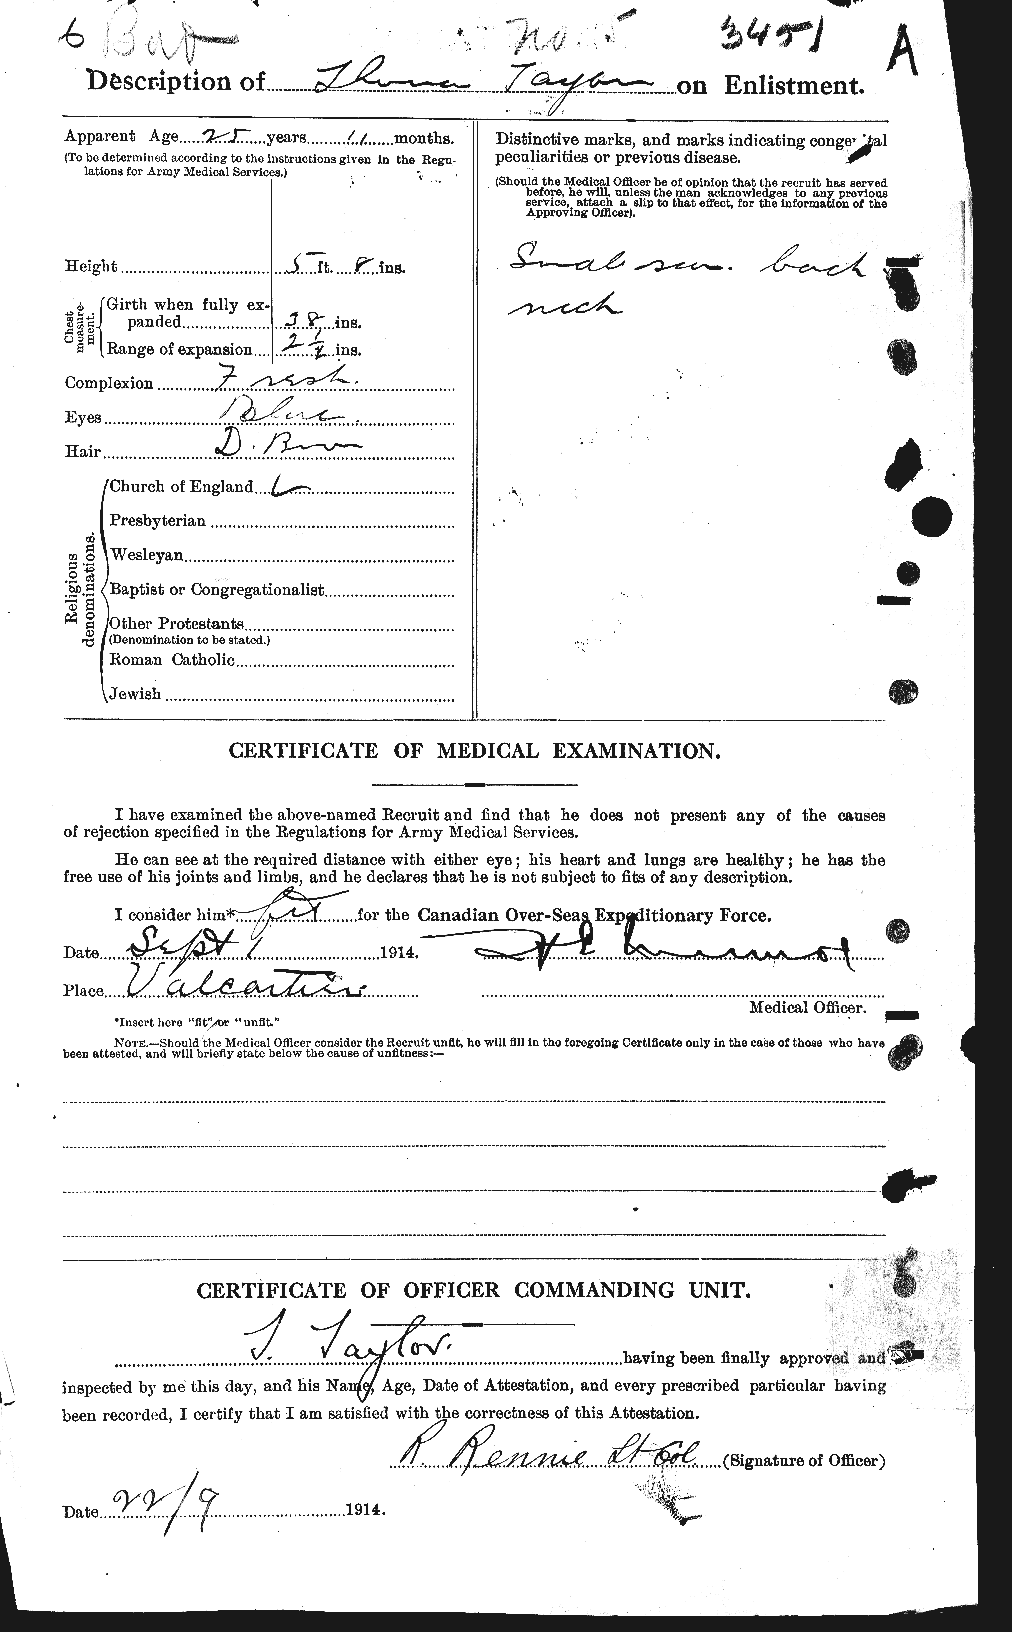 Personnel Records of the First World War - CEF 627952b